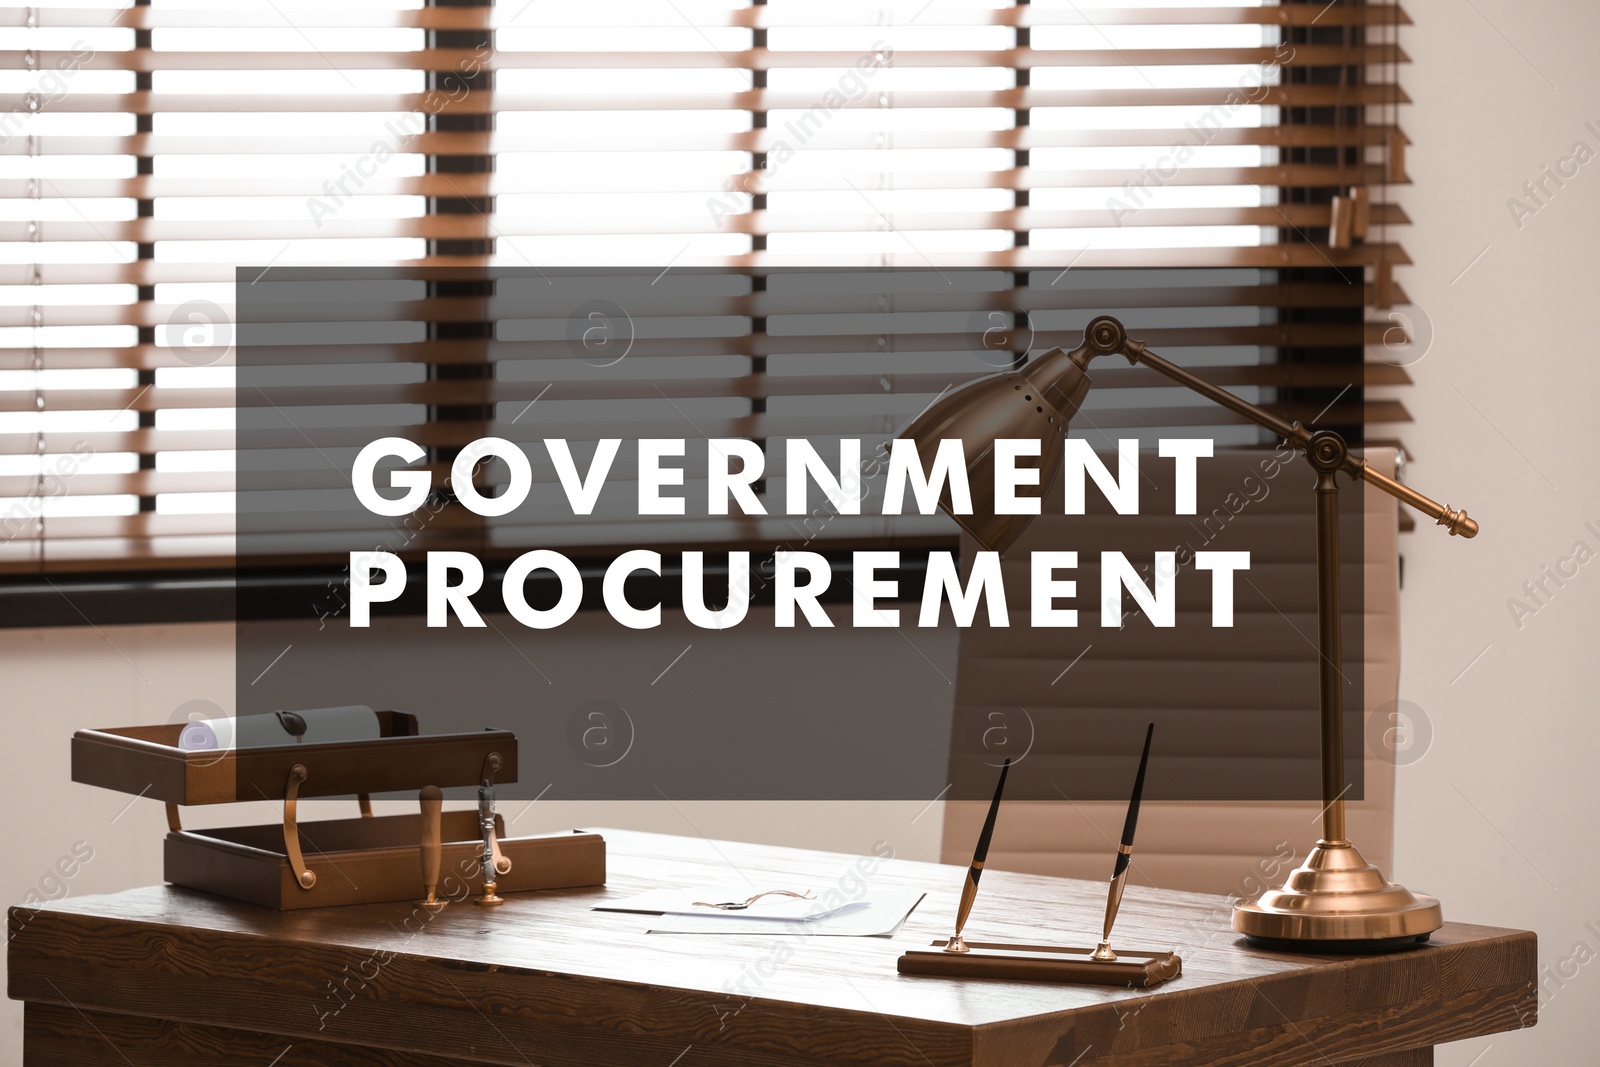 Image of Government procurement. Office interior with stationery and documents on desk